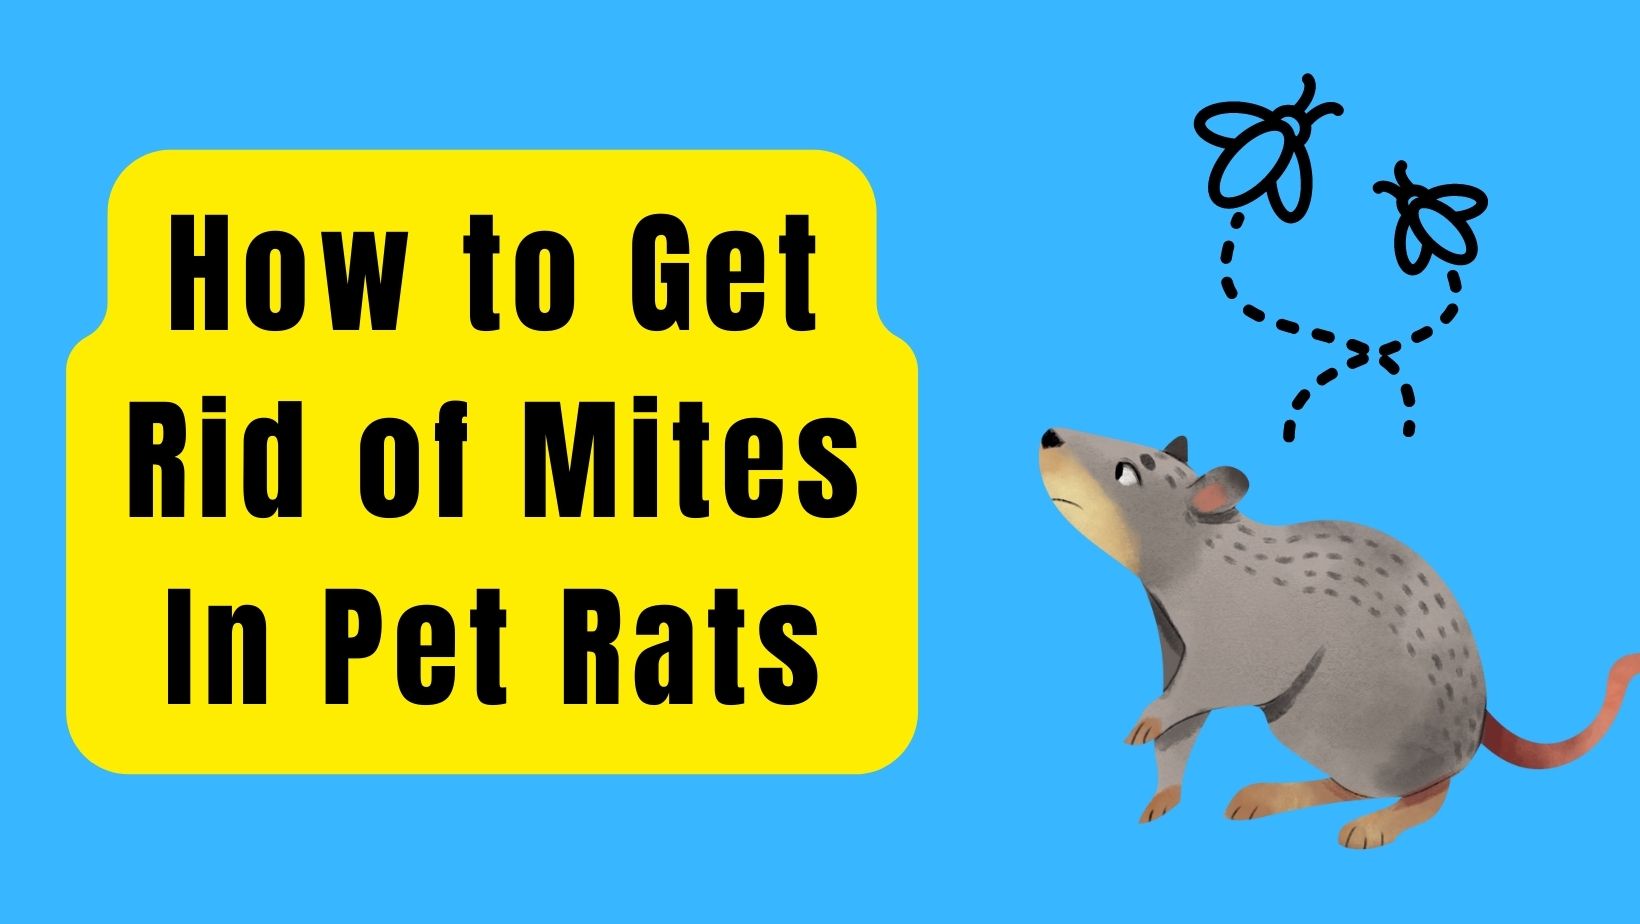 10 Ways: How to Get Rid of Mites In Pet Rats?